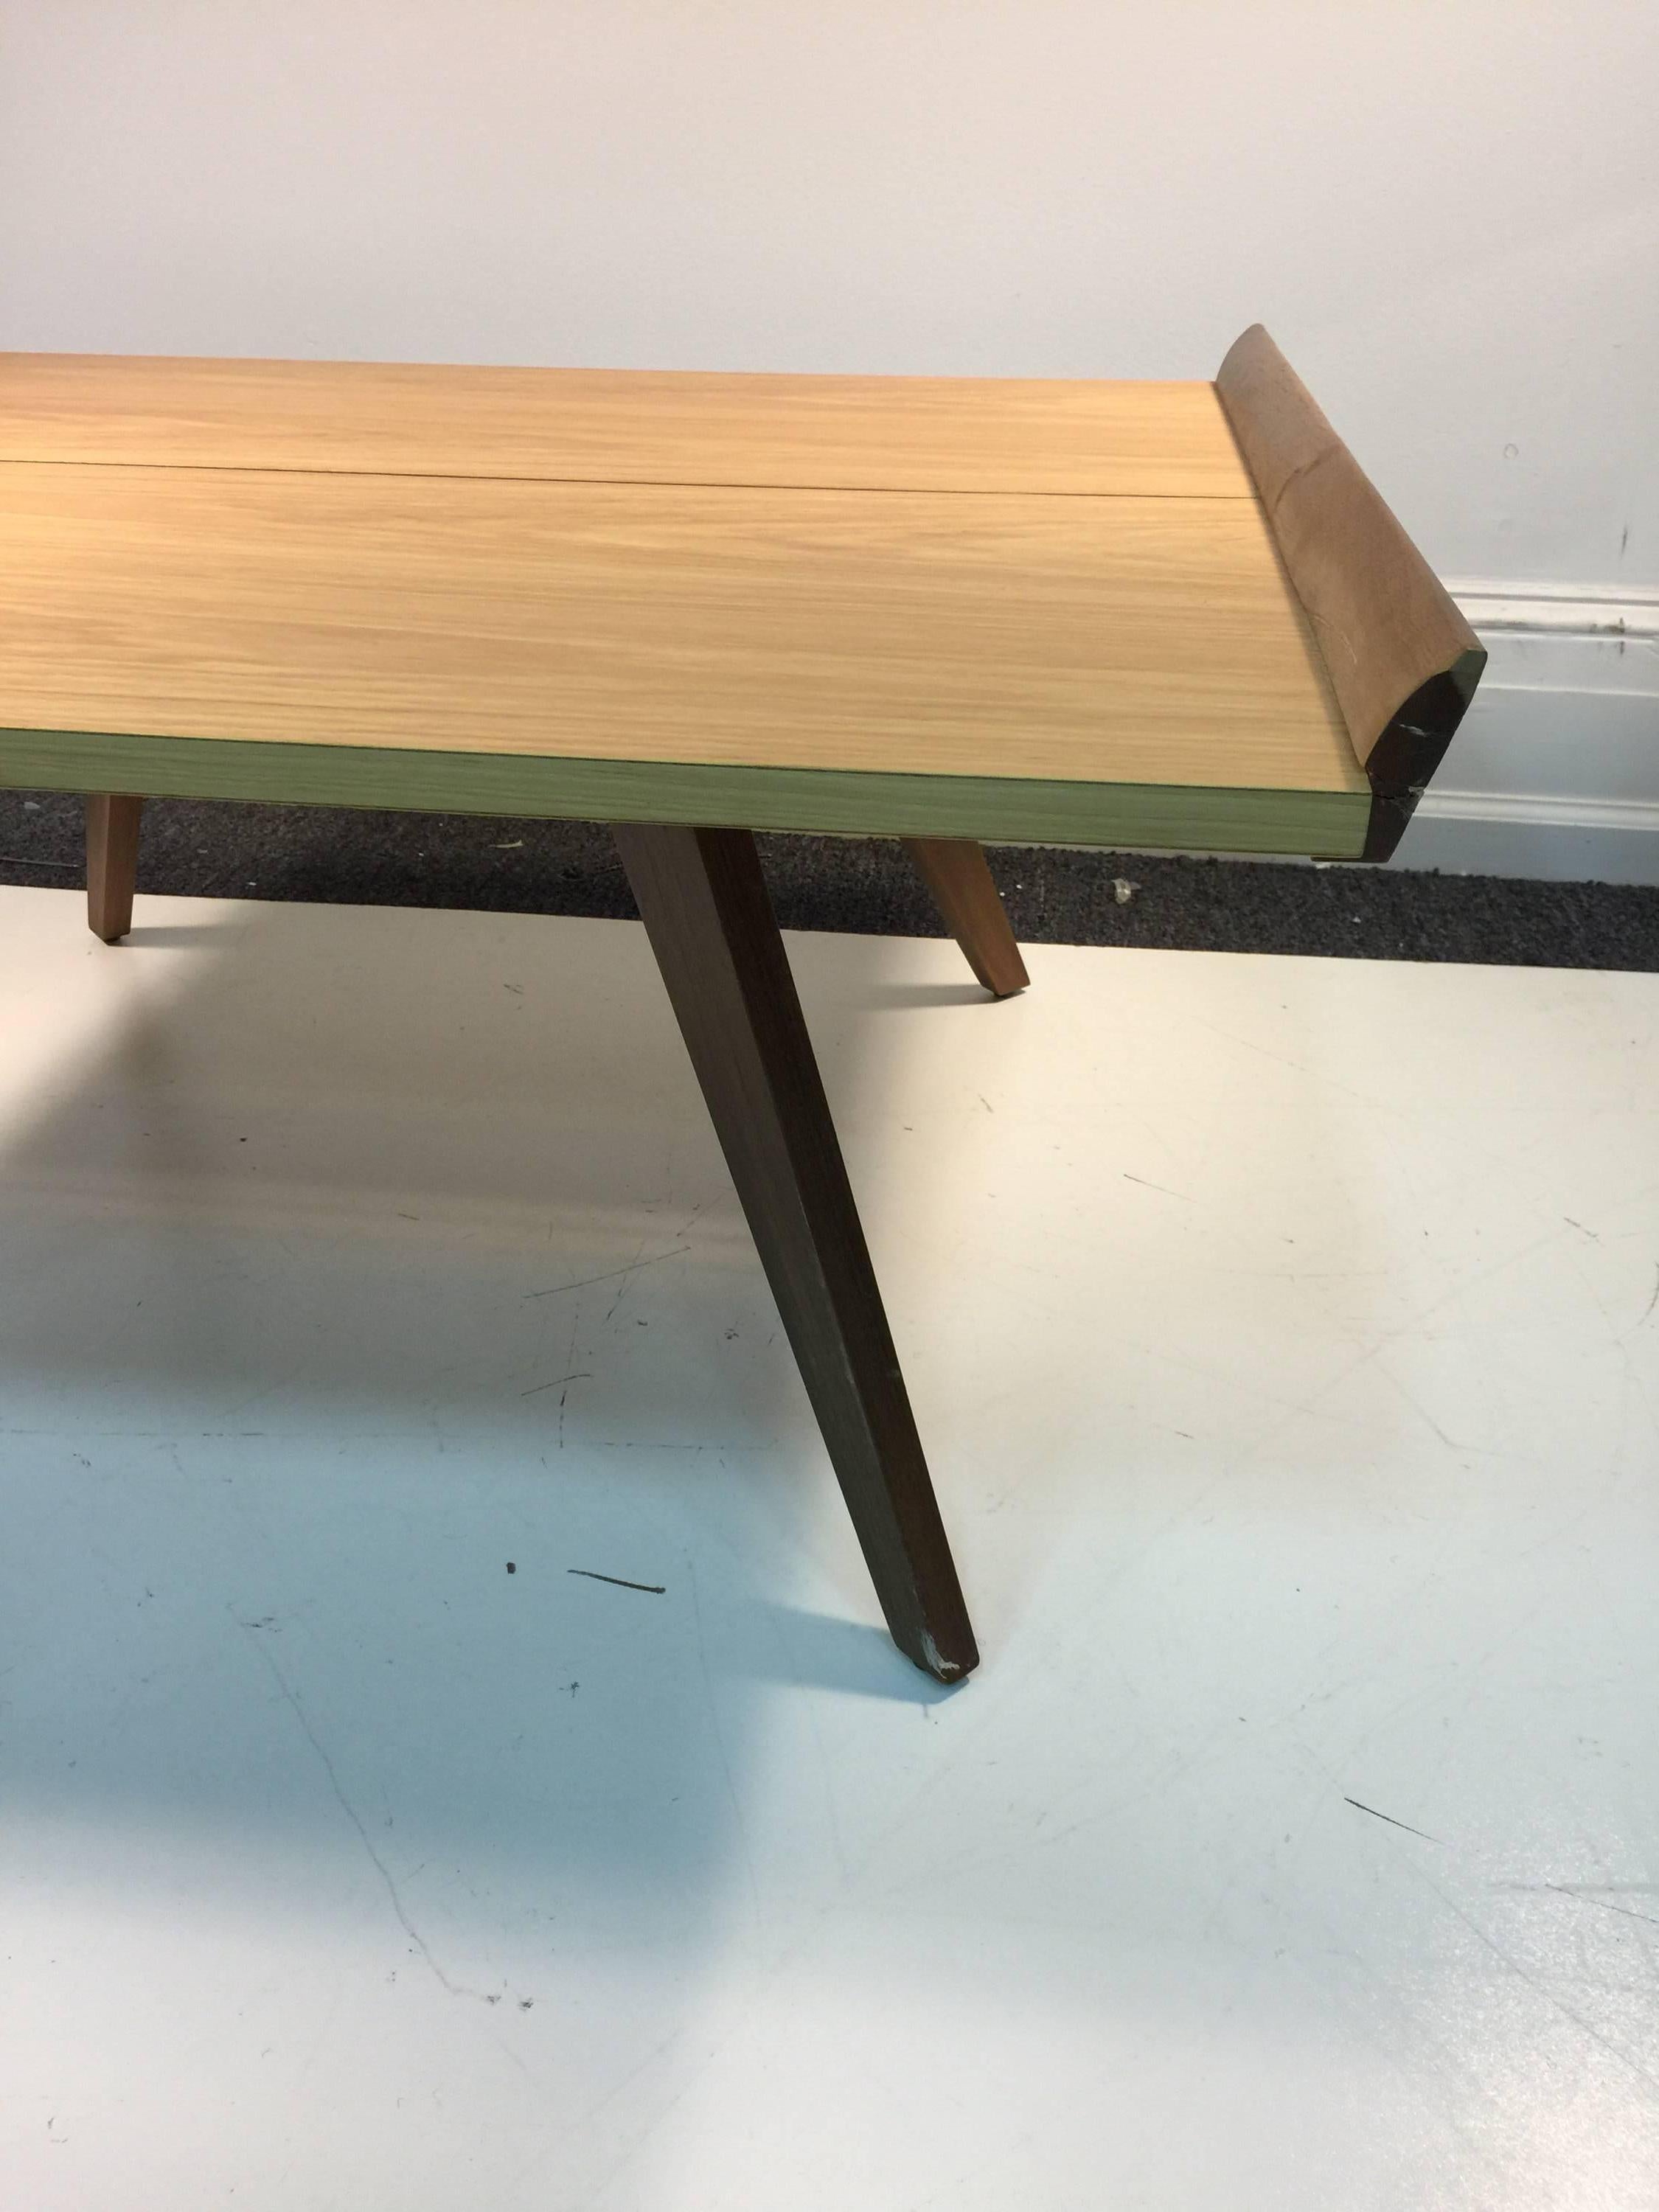 Gorgeous George Nakashima for Knoll Splay-Leg Table In Good Condition For Sale In Mount Penn, PA